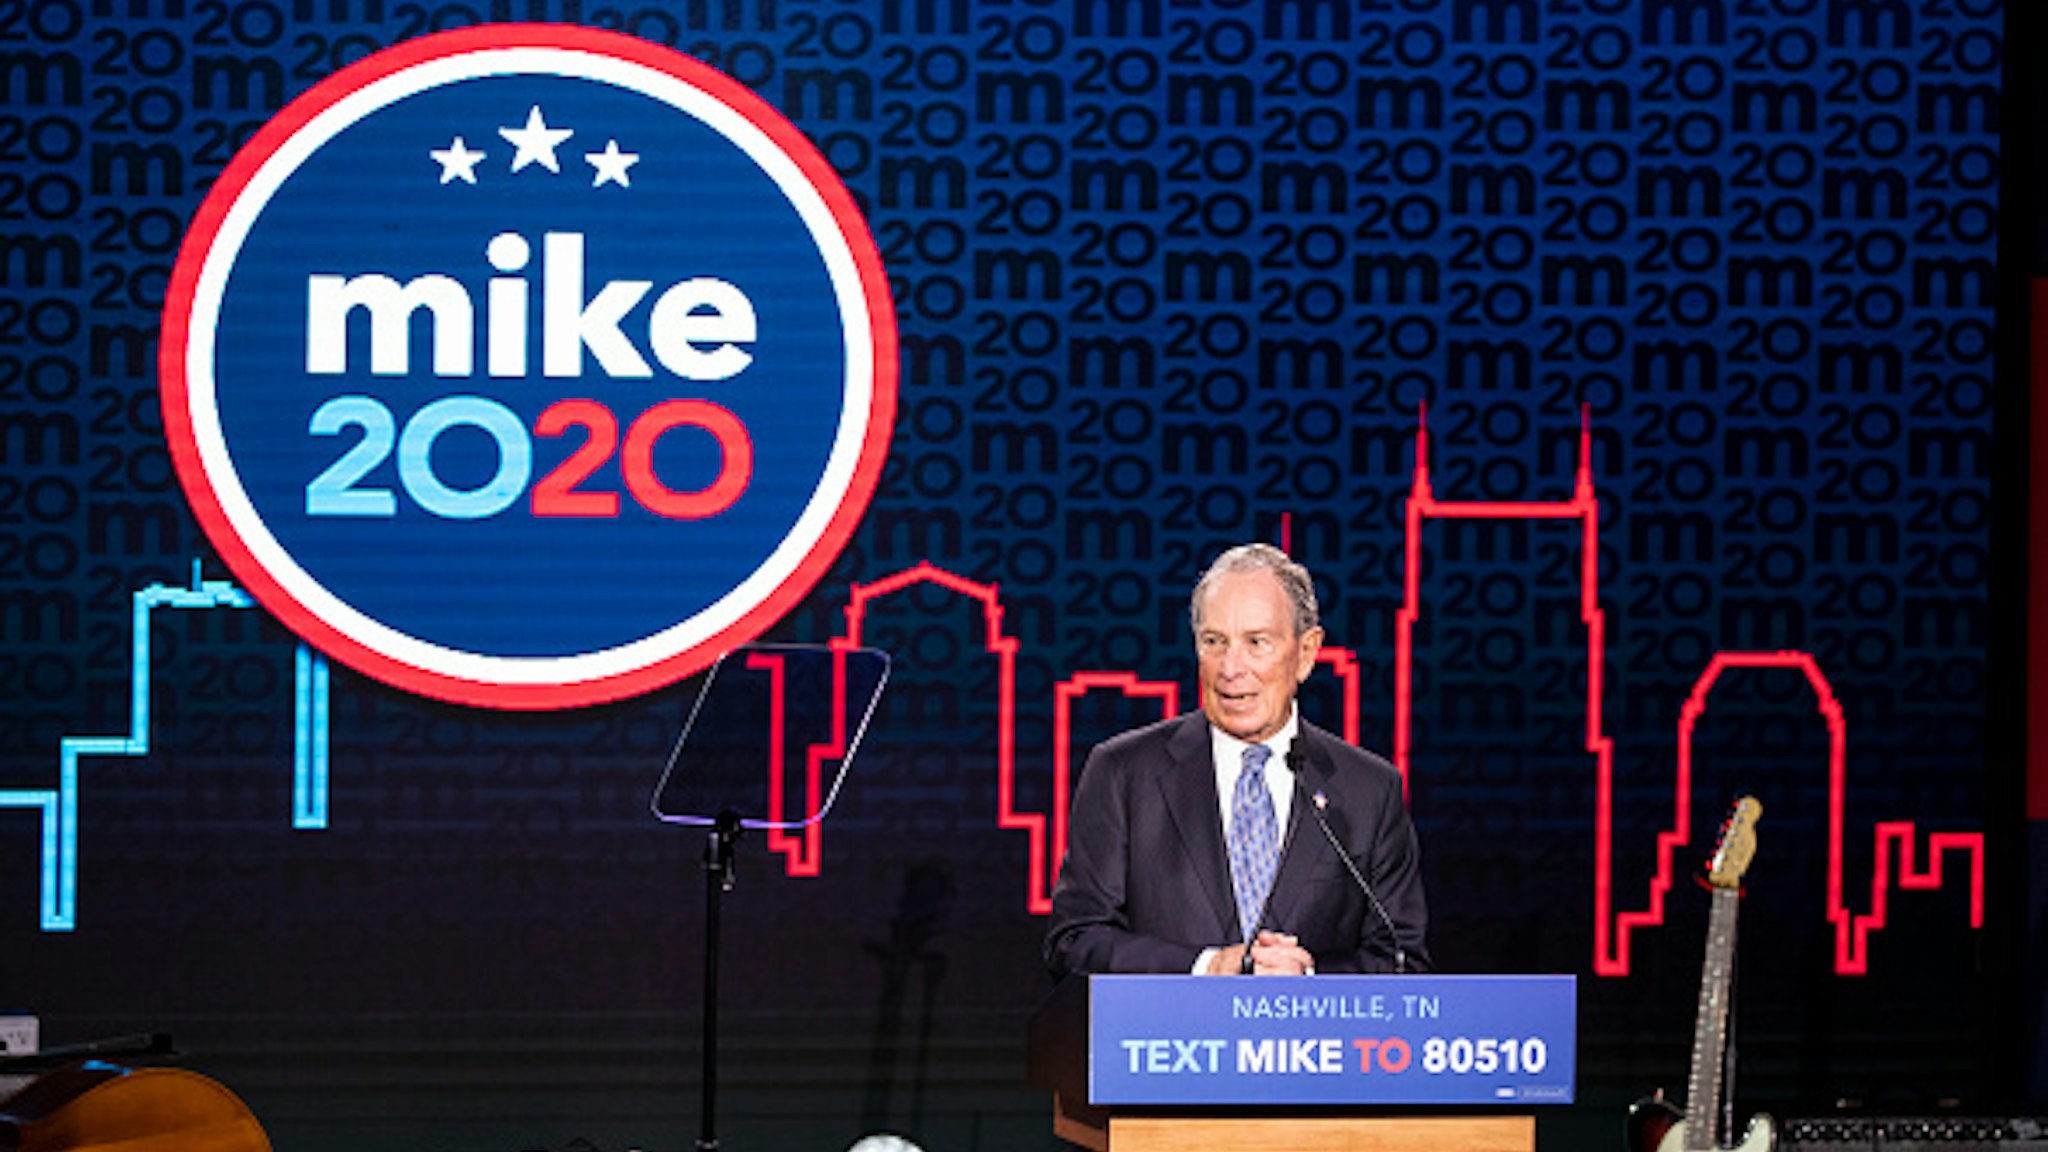 NASHVILLE, TN - FEBRUARY 12: Democratic presidential candidate former New York City Mayor Mike Bloomberg delivers remarks during a campaign rally on February 12, 2020 in Nashville, Tennessee. Bloomberg is holding the rally to mark the beginning of early voting in Tennessee ahead of the Super Tuesday primary on March 3rd.